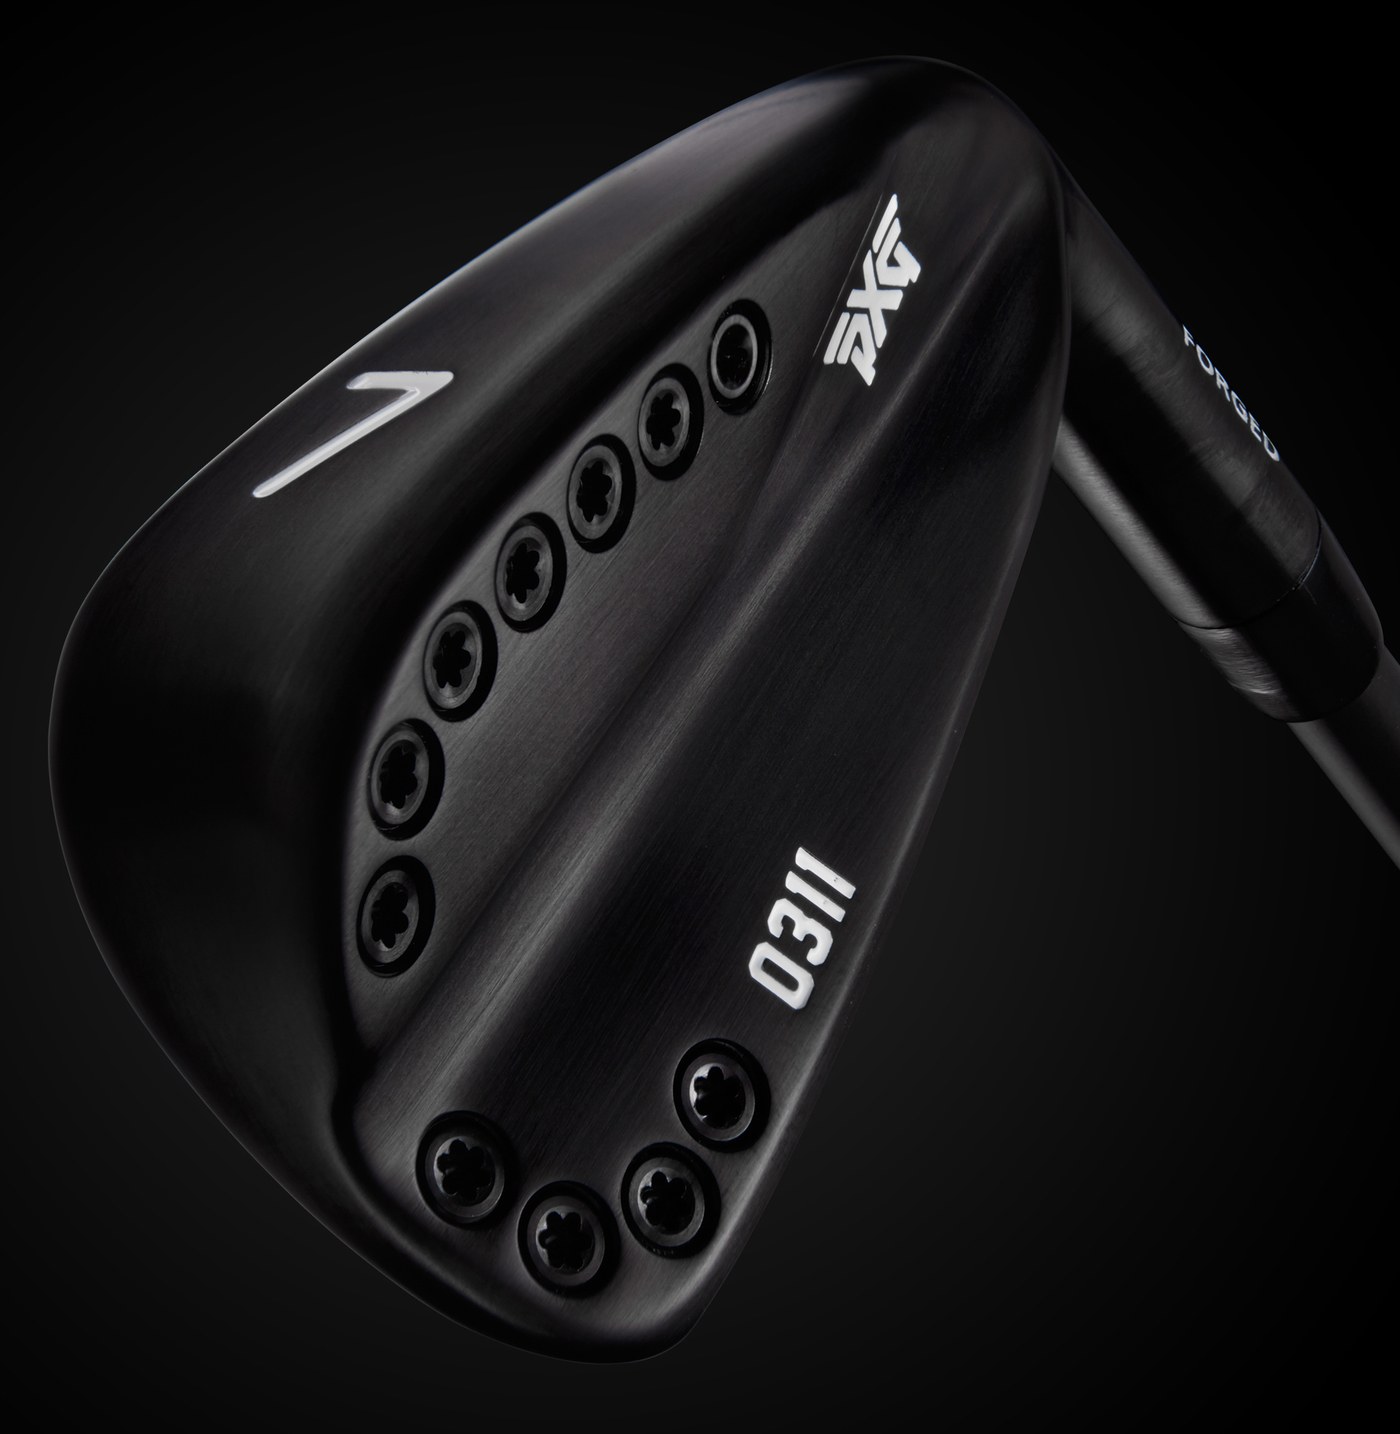 PXG retail store opens up custom golf clubs to consumers